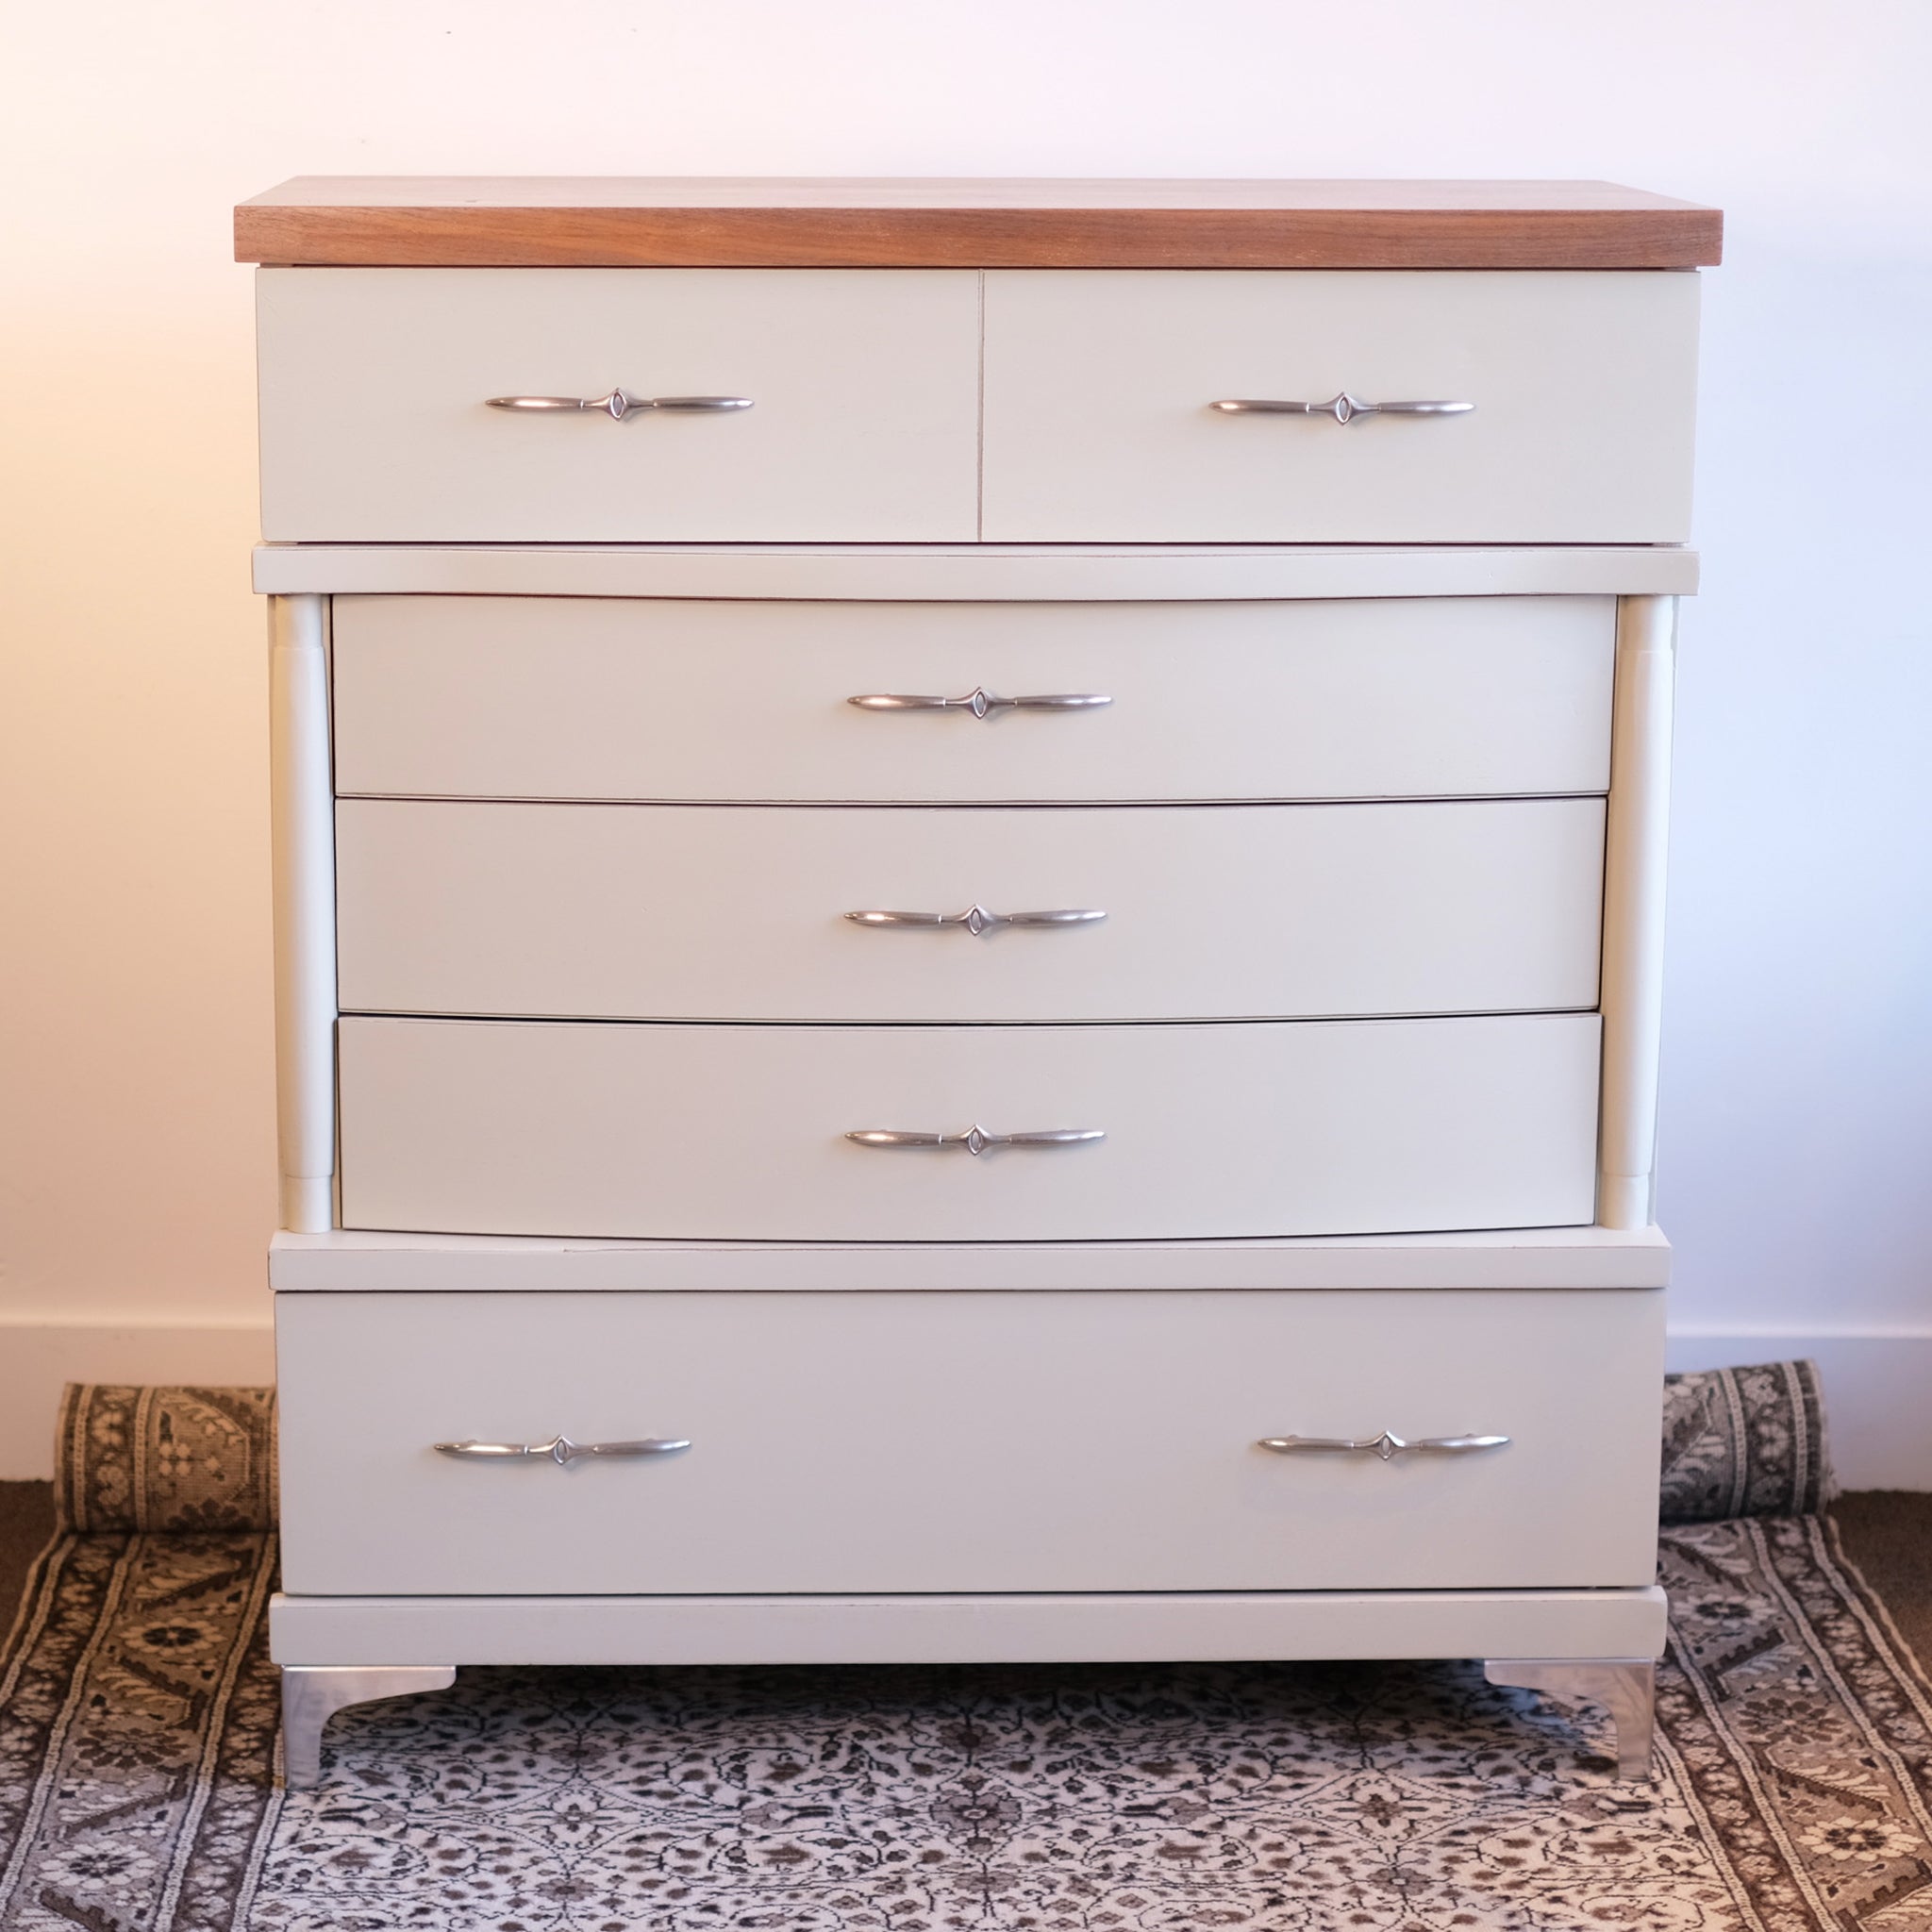 United Silver Beauty Chest of Drawers